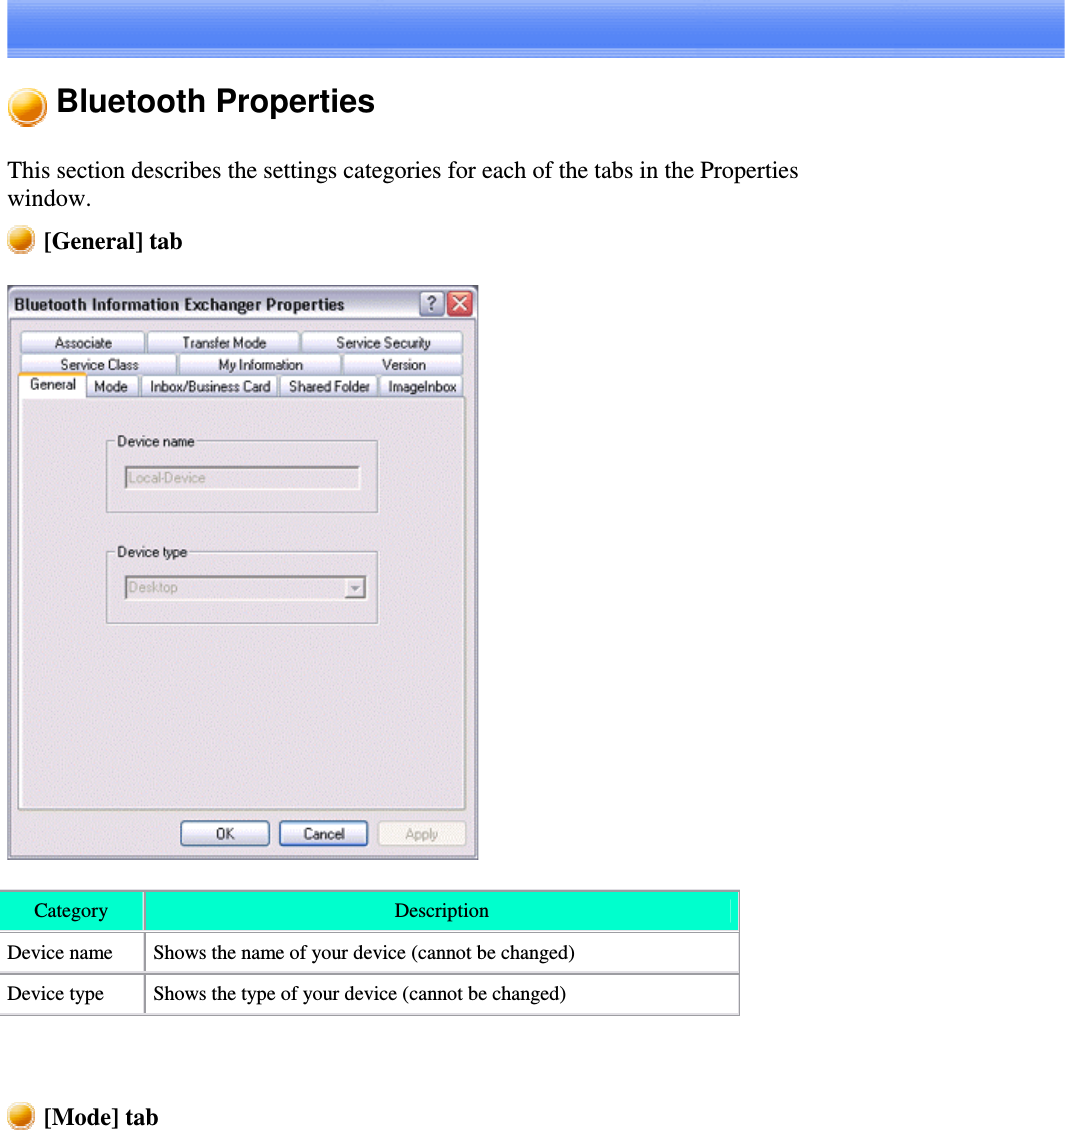 Bluetooth PropertiesThis section describes the settings categories for each of the tabs in the Propertieswindow.[General] tabCategory DescriptionDevice name Shows the name of your device (cannot be changed)Device type Shows the type of your device (cannot be changed)[Mode] tab